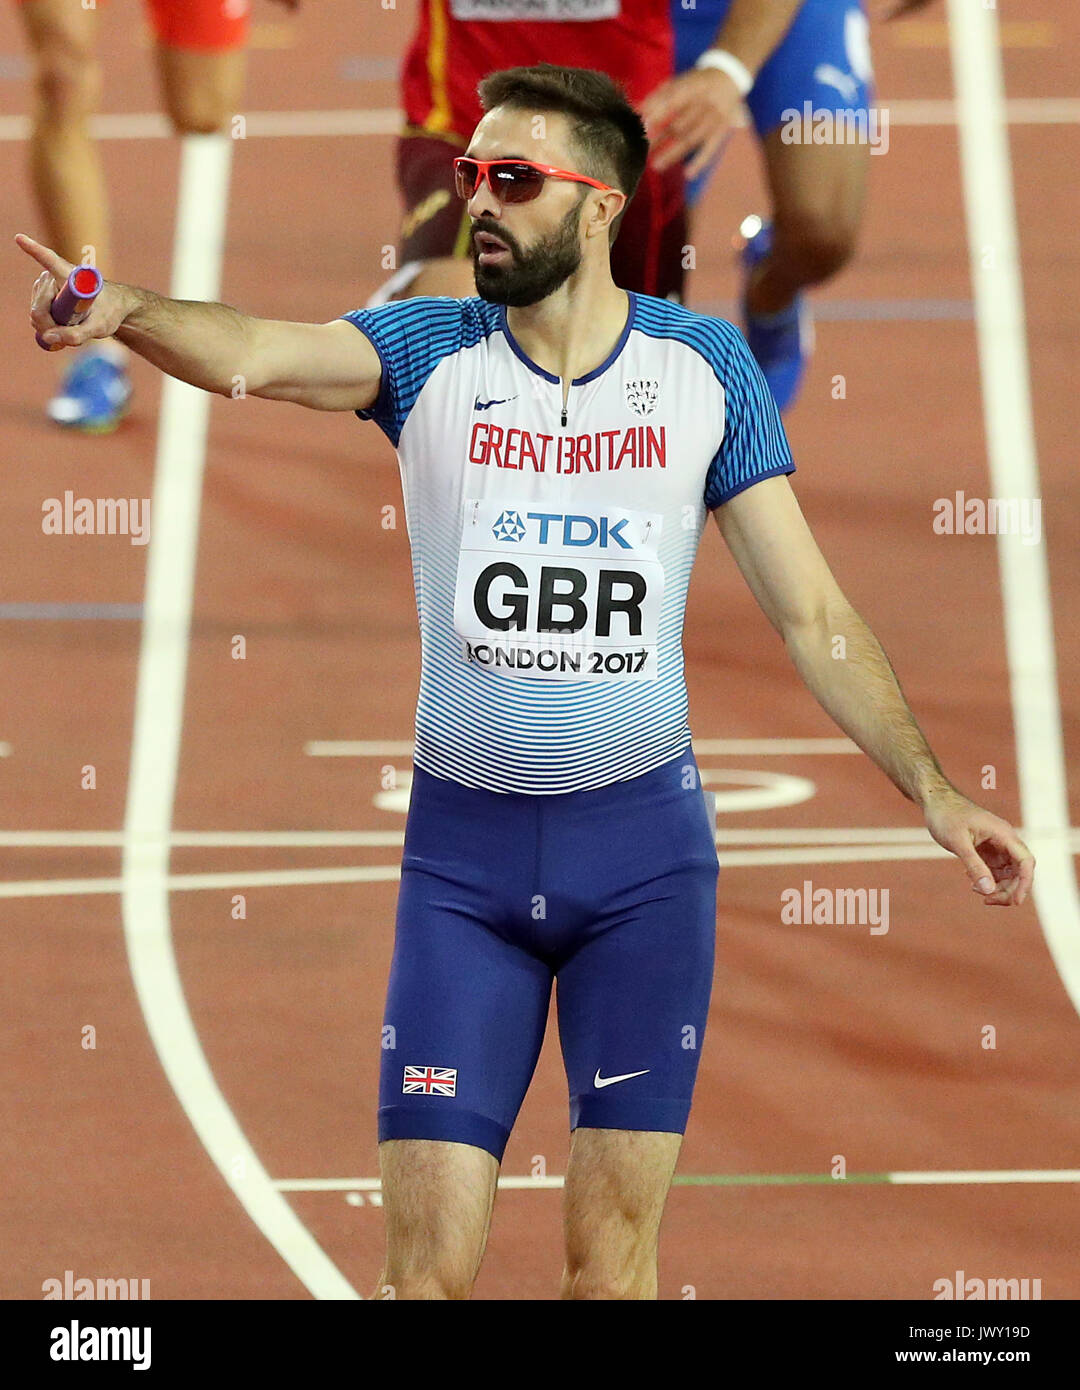 Great Britain's Martyn Rooney celebrates taking bronze in the Men's 4x400m Relay Final during day ten of the 2017 IAAF World Championships at the London Stadium. PRESS ASSOCIATION Photo. Picture date: Sunday August 13, 2017. See PA story ATHLETICS World. Photo credit should read: Jonathan Brady/PA Wire. Stock Photo